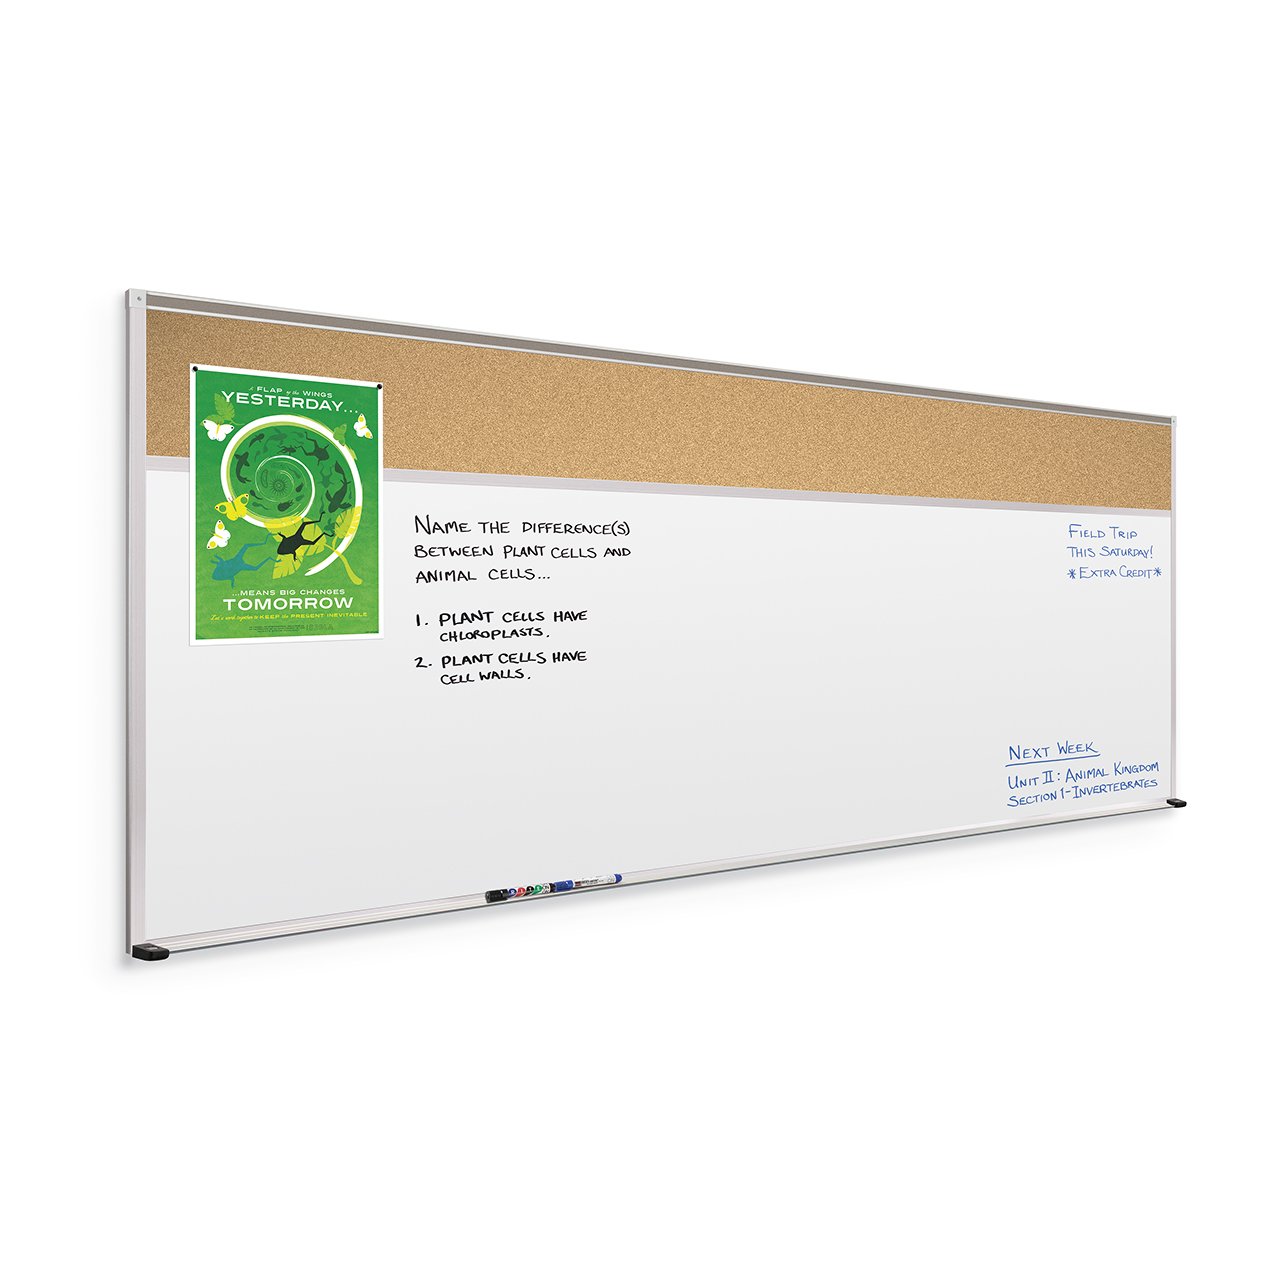 Mooreco Combination Type C Board Porcelain Steel Whiteboard Surface 4'H x 16'W